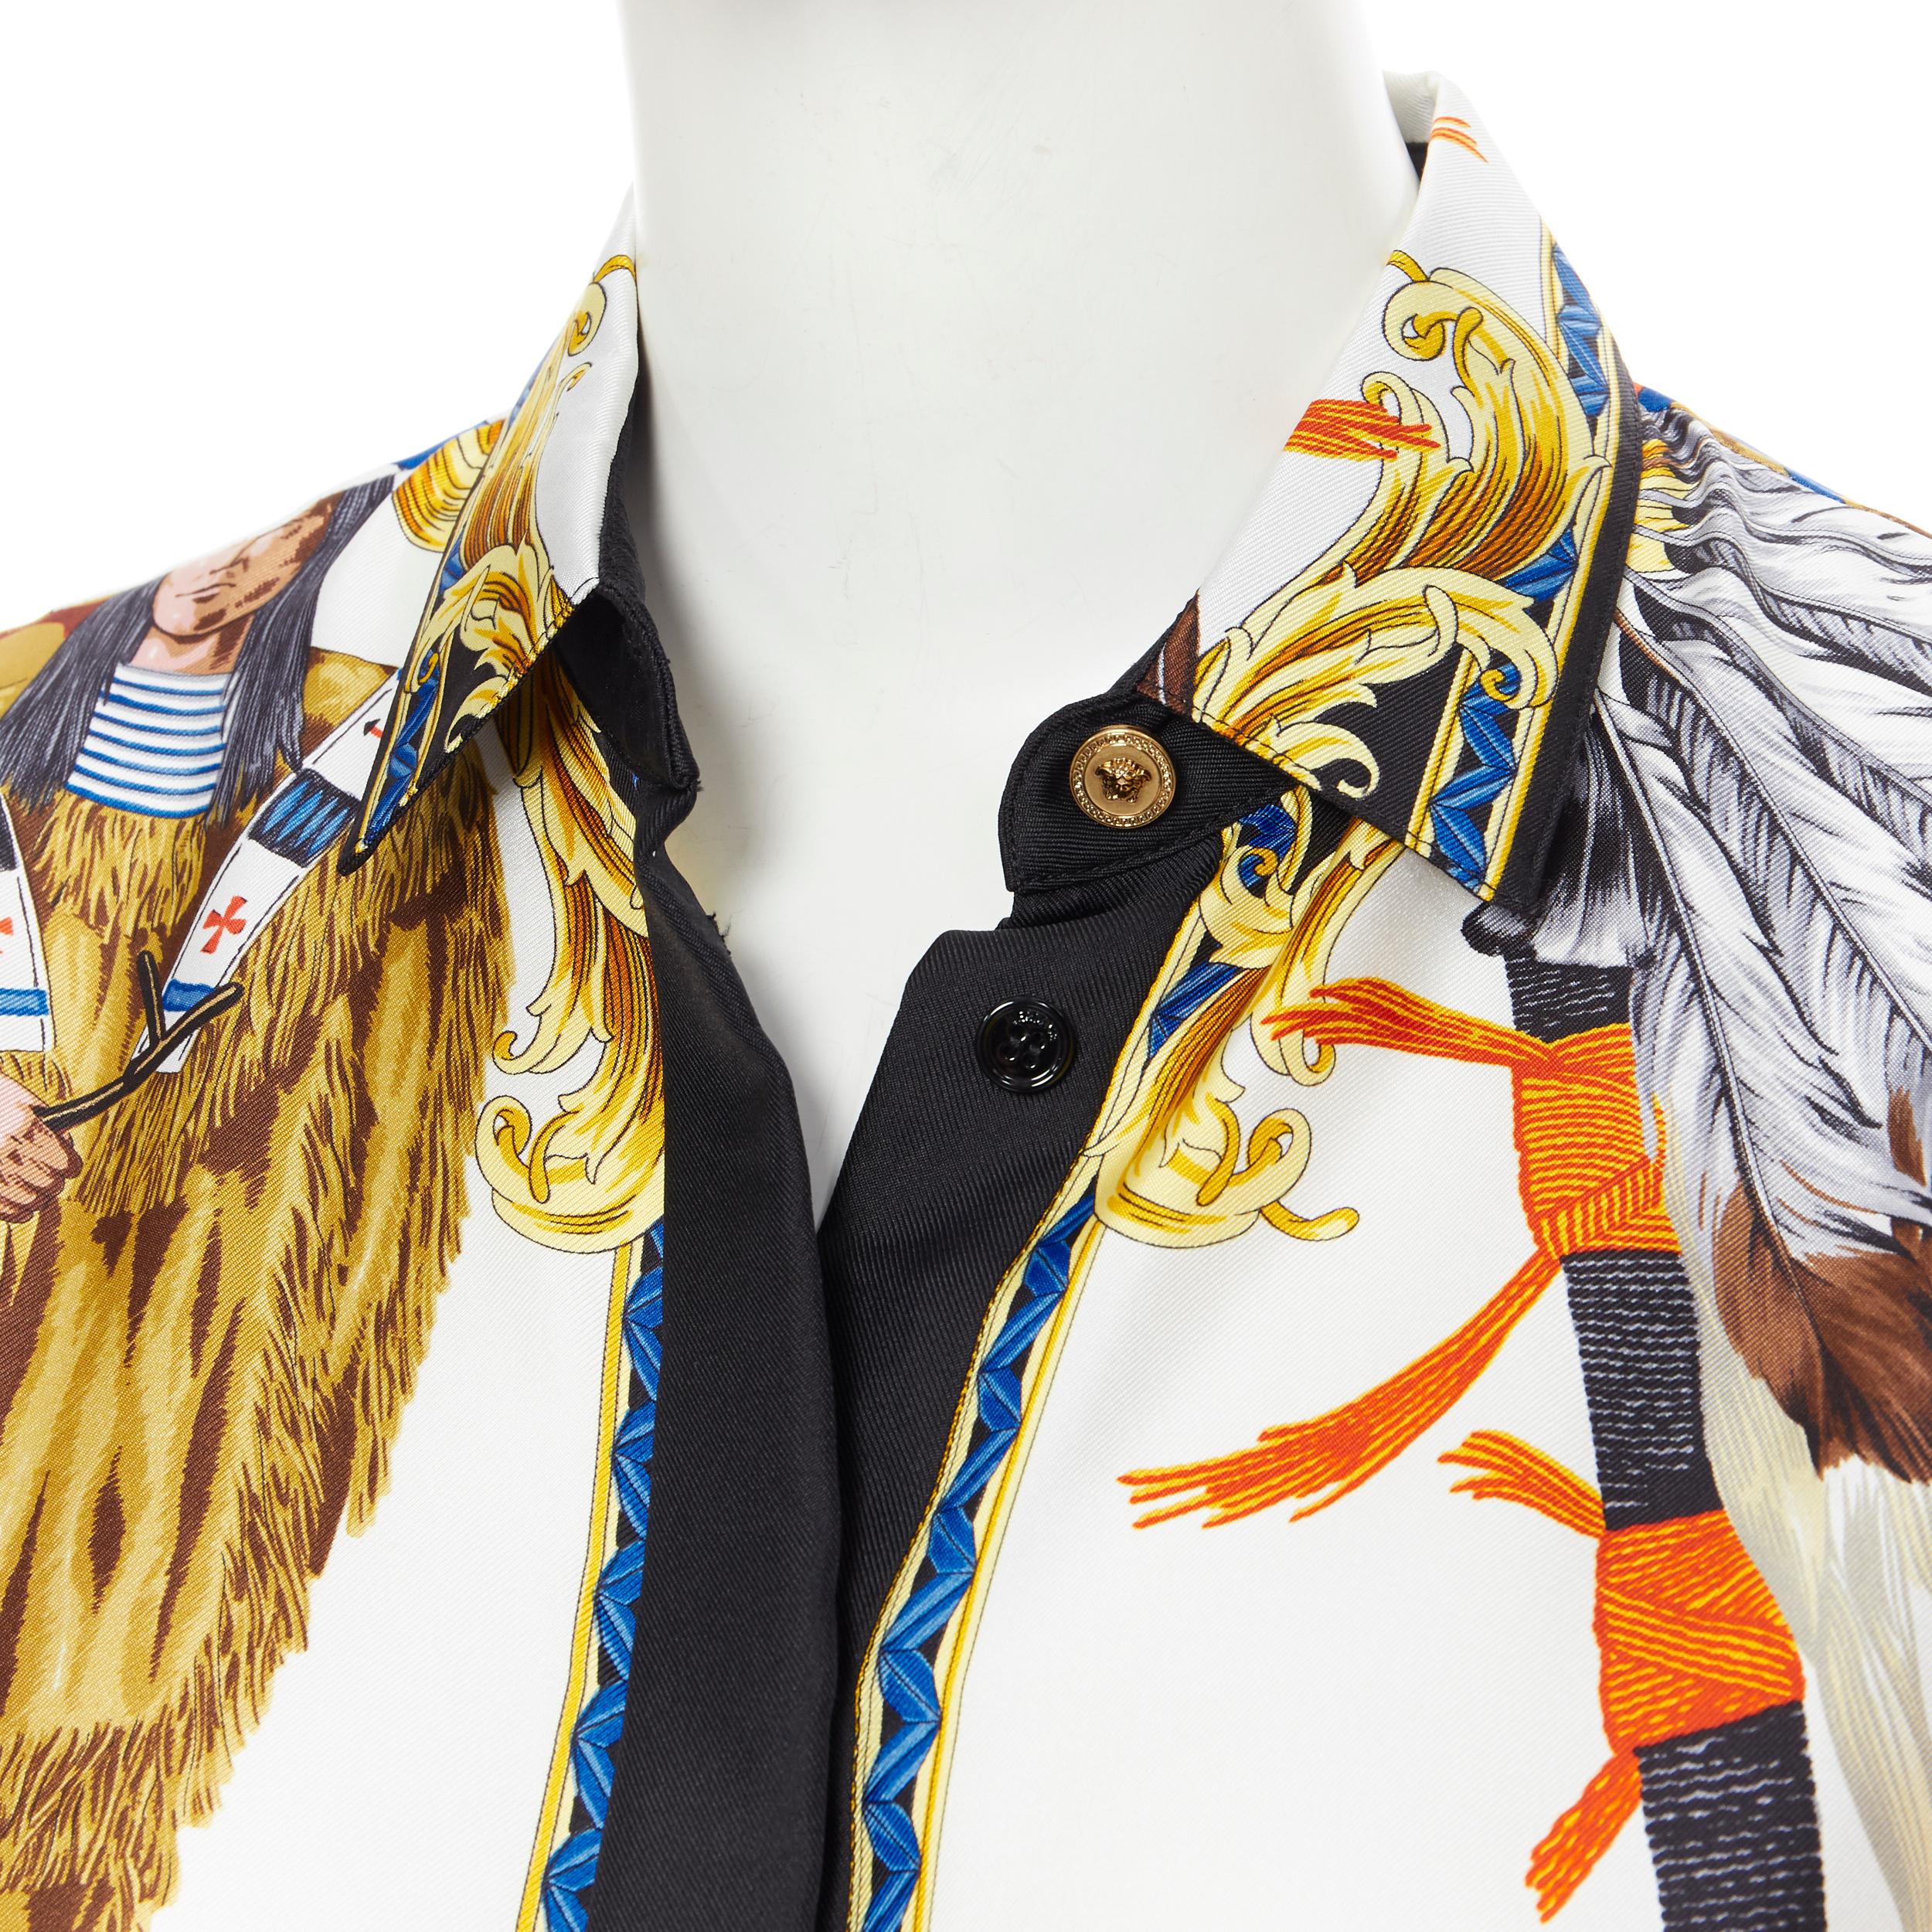 new VERSACE Tribute Native America FW1992 print gold Medusa silk shirt IT40 S
Brand: Versace
Designer: Donatella Versace
Collection: SS18
Model Name / Style: Silk shirt
Material: Silk
Color: White
Pattern: Abstract
Closure: Button
Extra Detail: